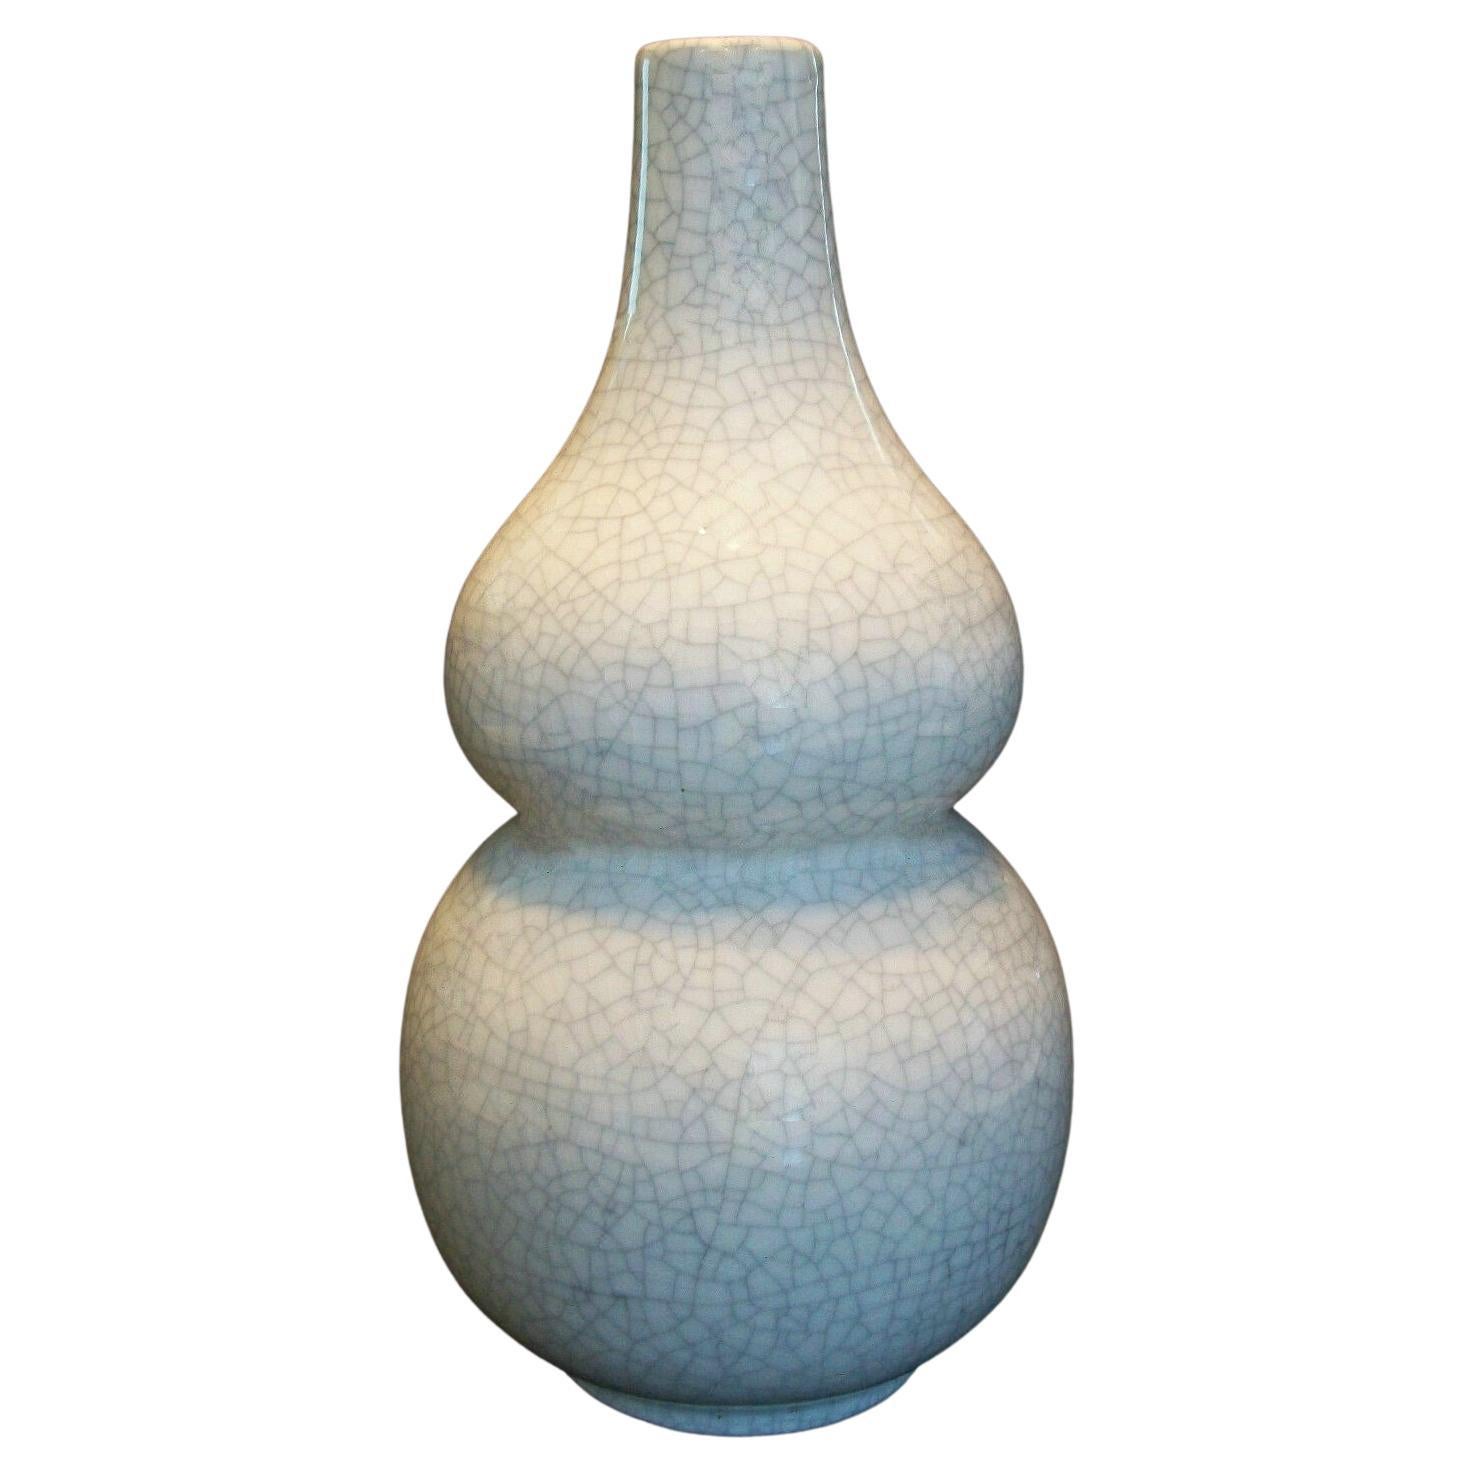 Ming Style Double Gourd Crackle Glaze Ceramic Vase - Signed - Mid-20th Century For Sale